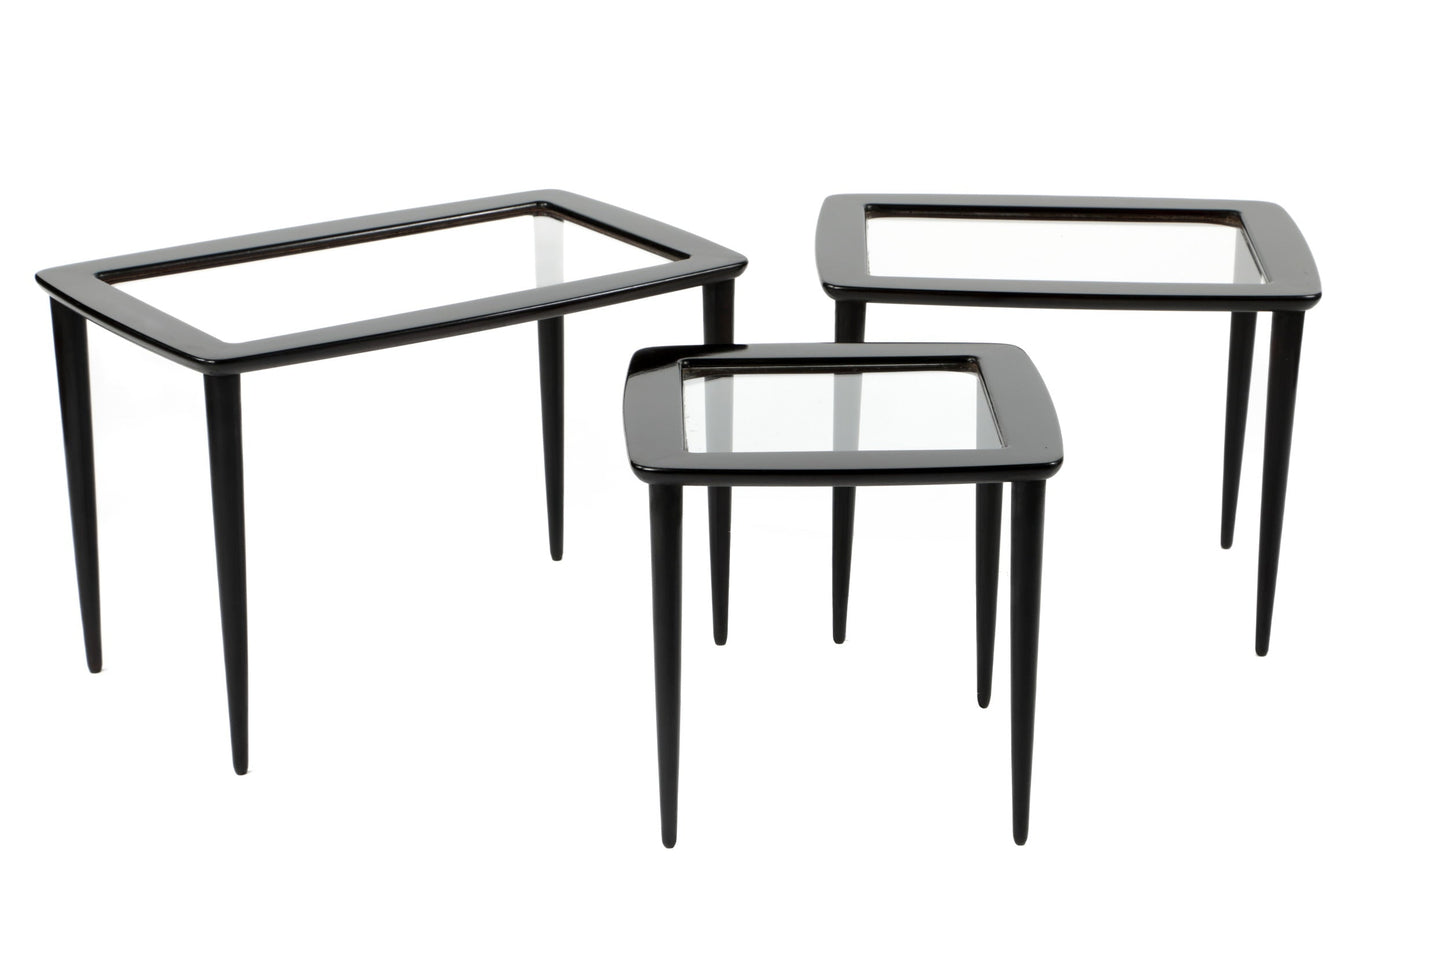 Triptych of Ico Parisi tables from the 1950s